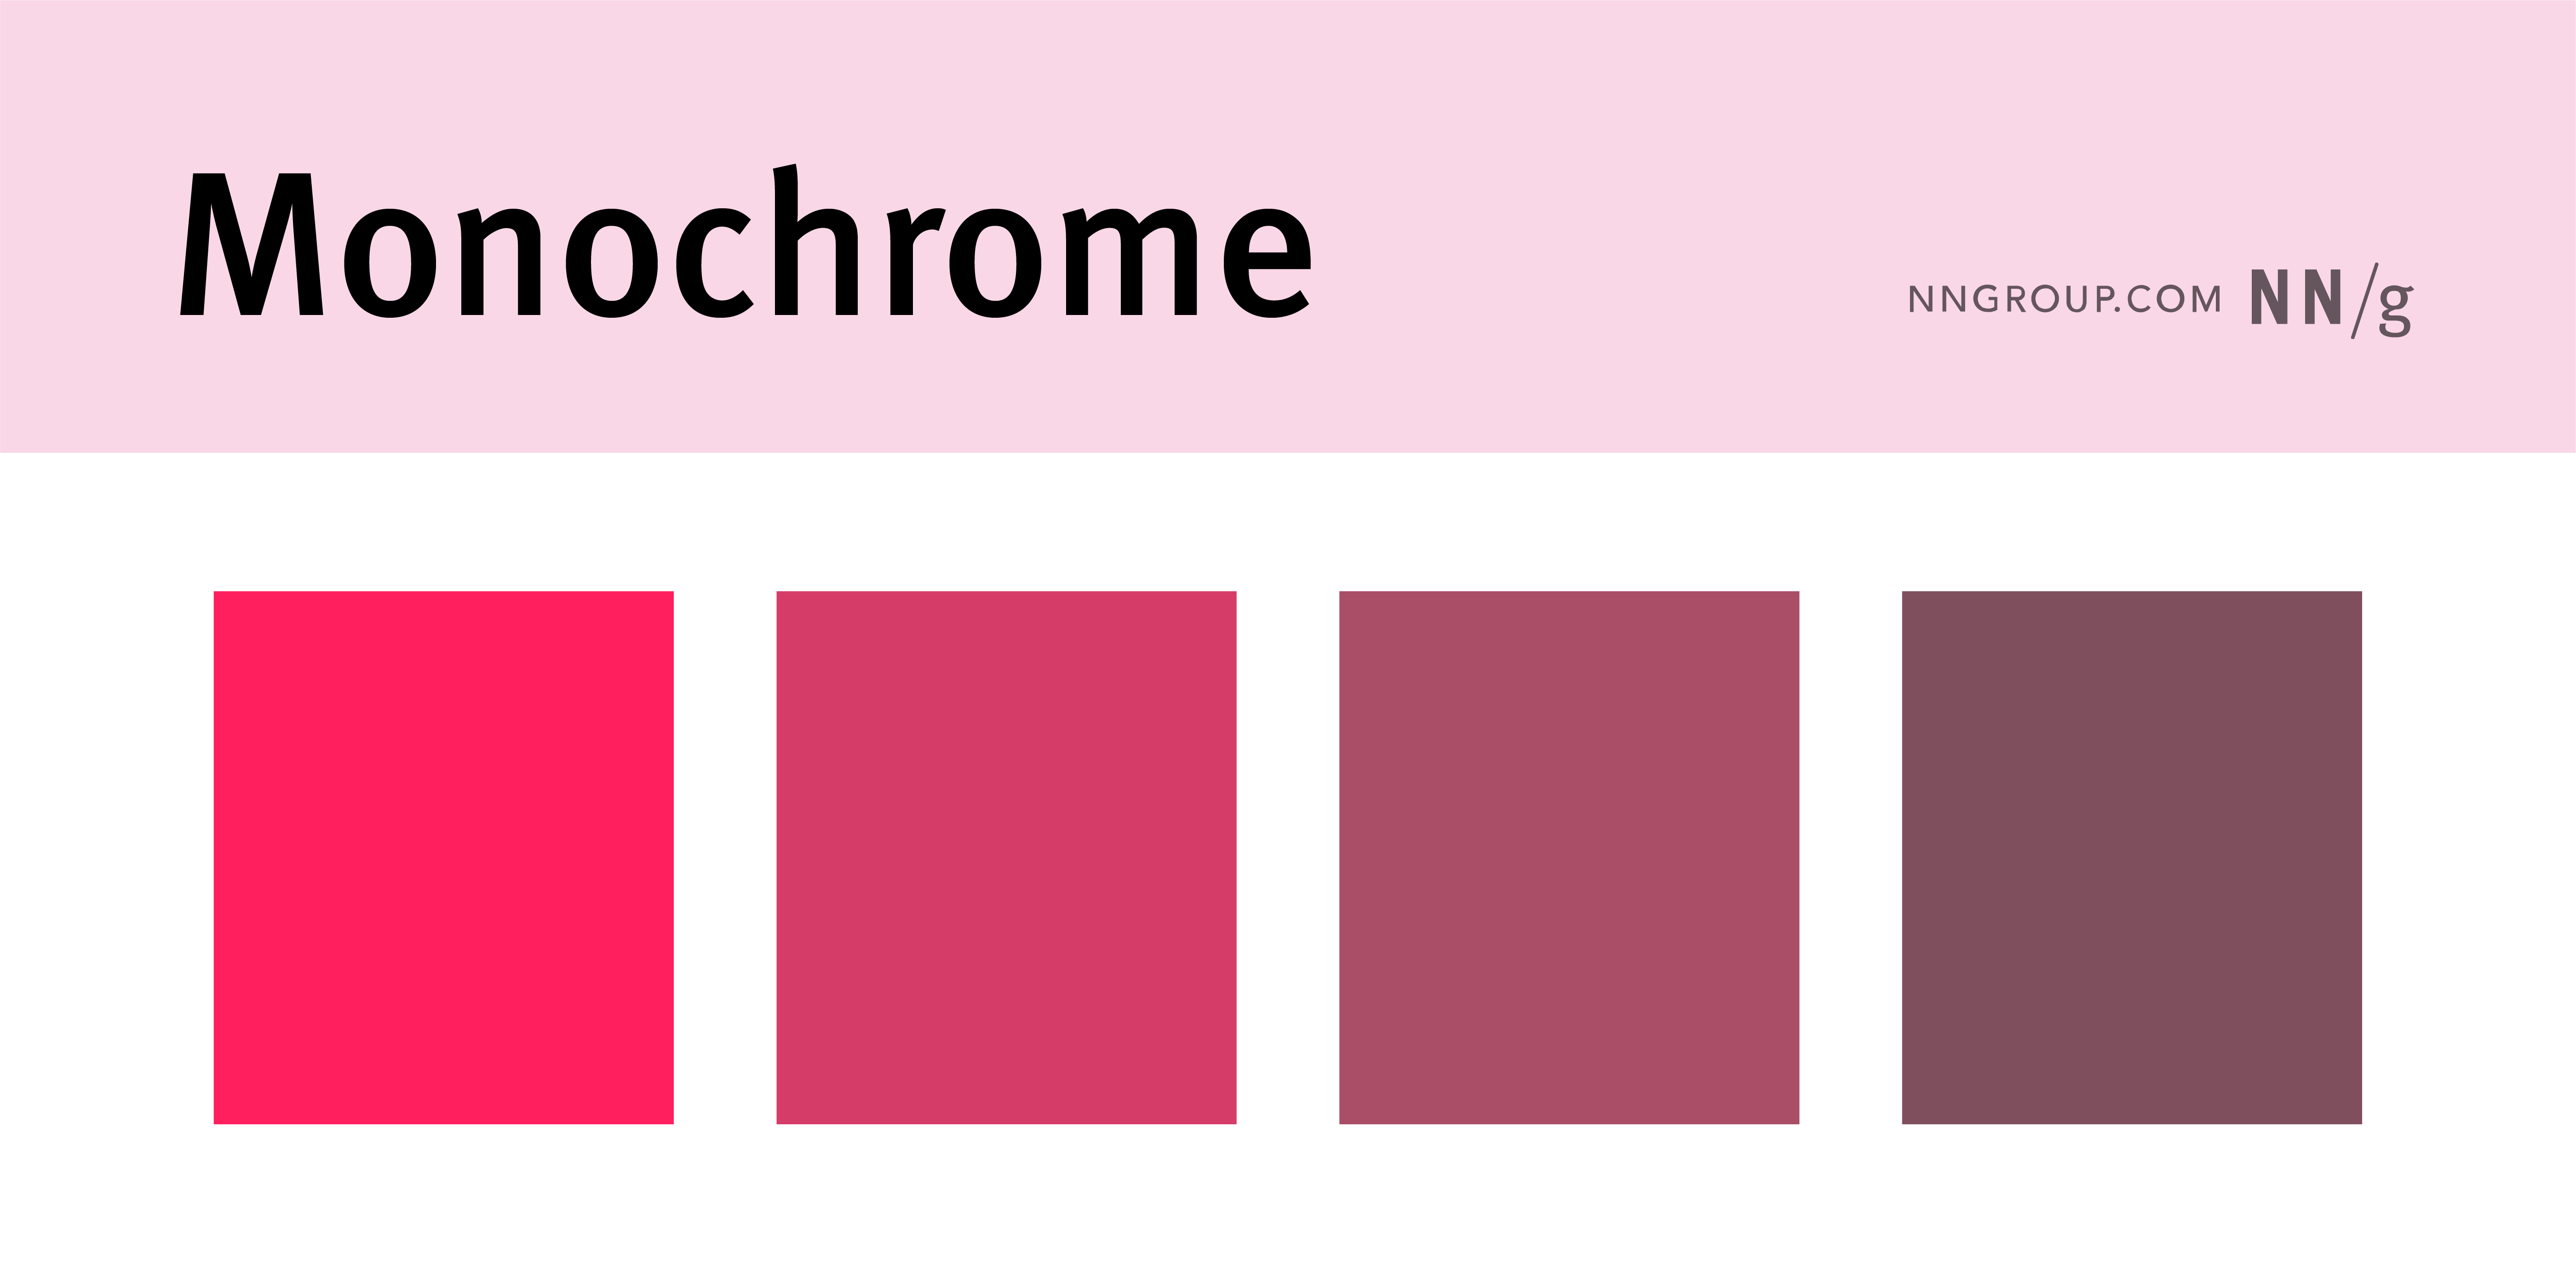 Four squares in varying shades of pink from bright to dark